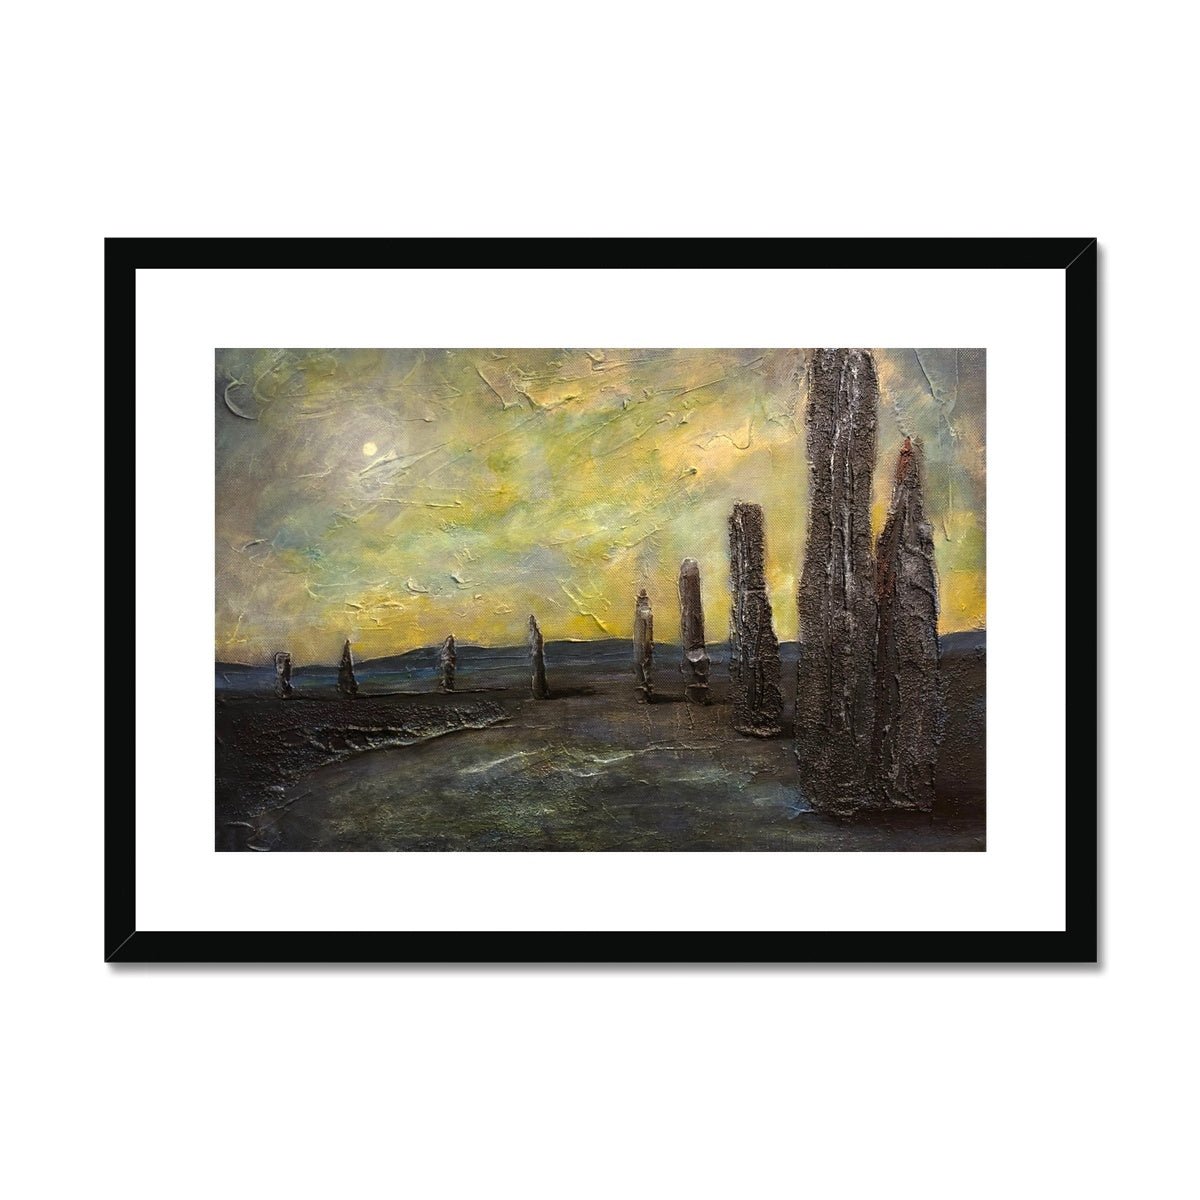 An Ethereal Ring Of Brodgar Orkney Painting | Framed & Mounted Prints From Scotland-Framed & Mounted Prints-Orkney Art Gallery-A2 Landscape-Black Frame-Paintings, Prints, Homeware, Art Gifts From Scotland By Scottish Artist Kevin Hunter